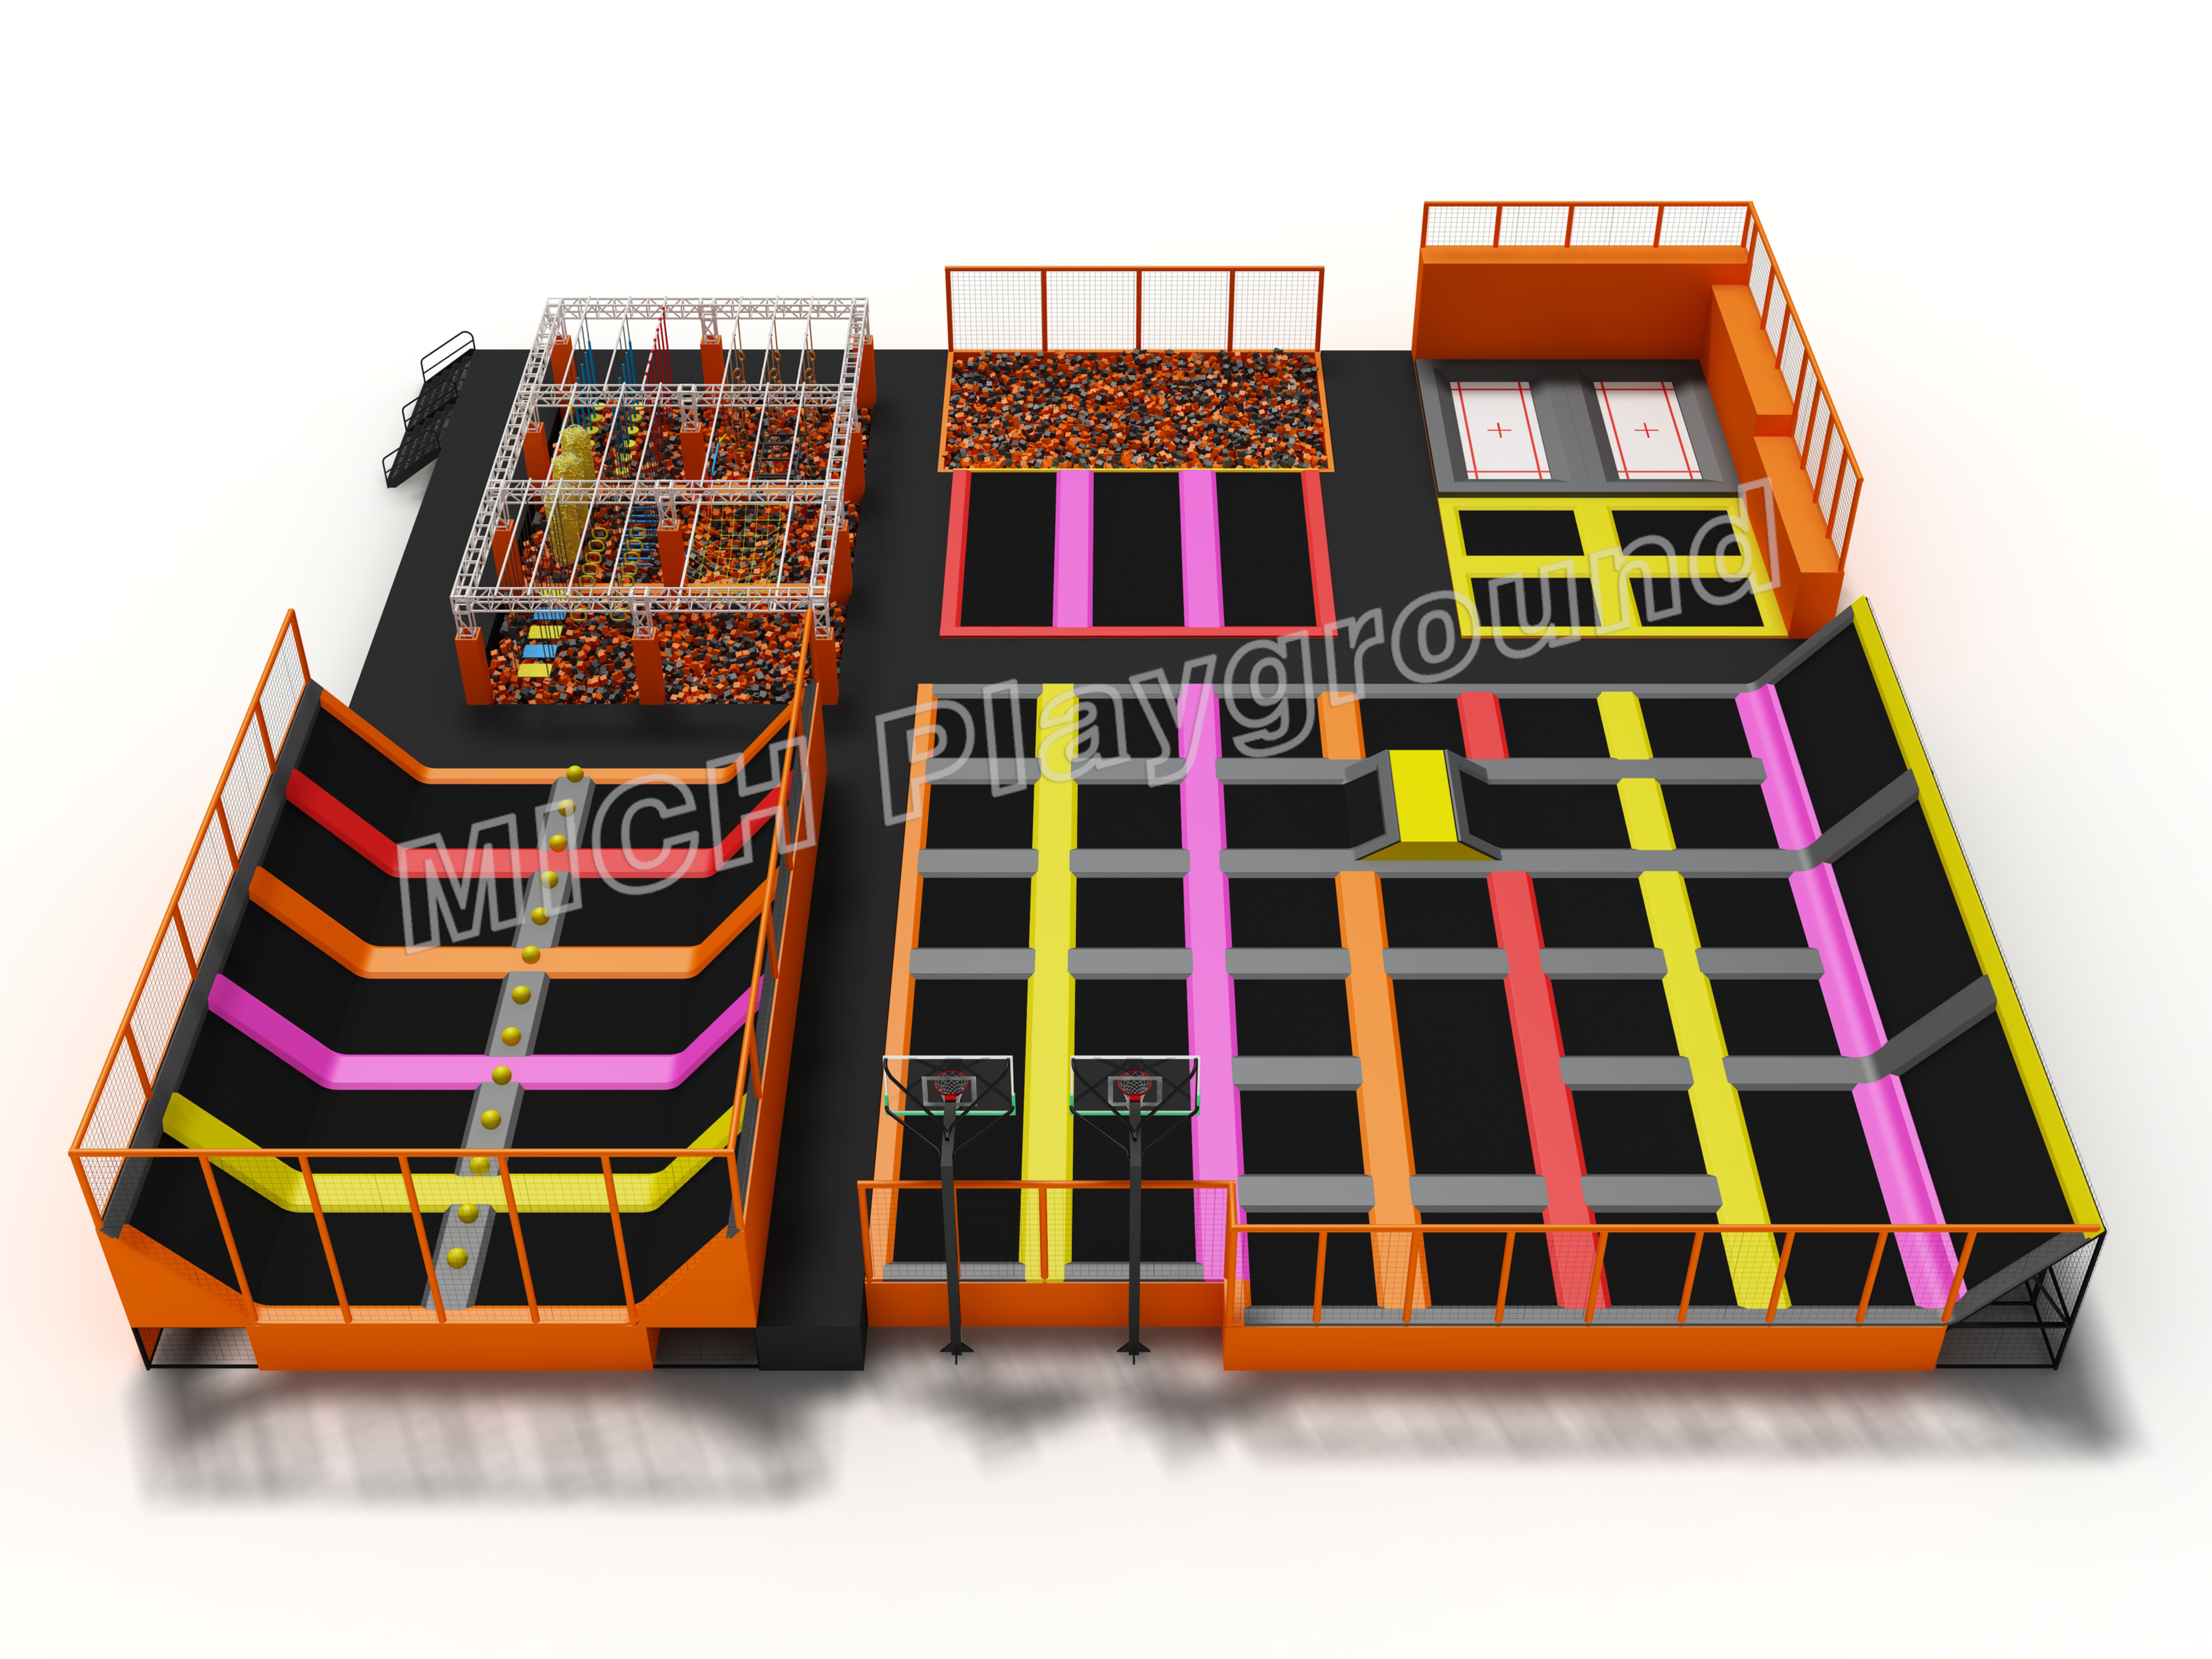 bungee trampoline and Mich customized indoor trampoline park 7106A